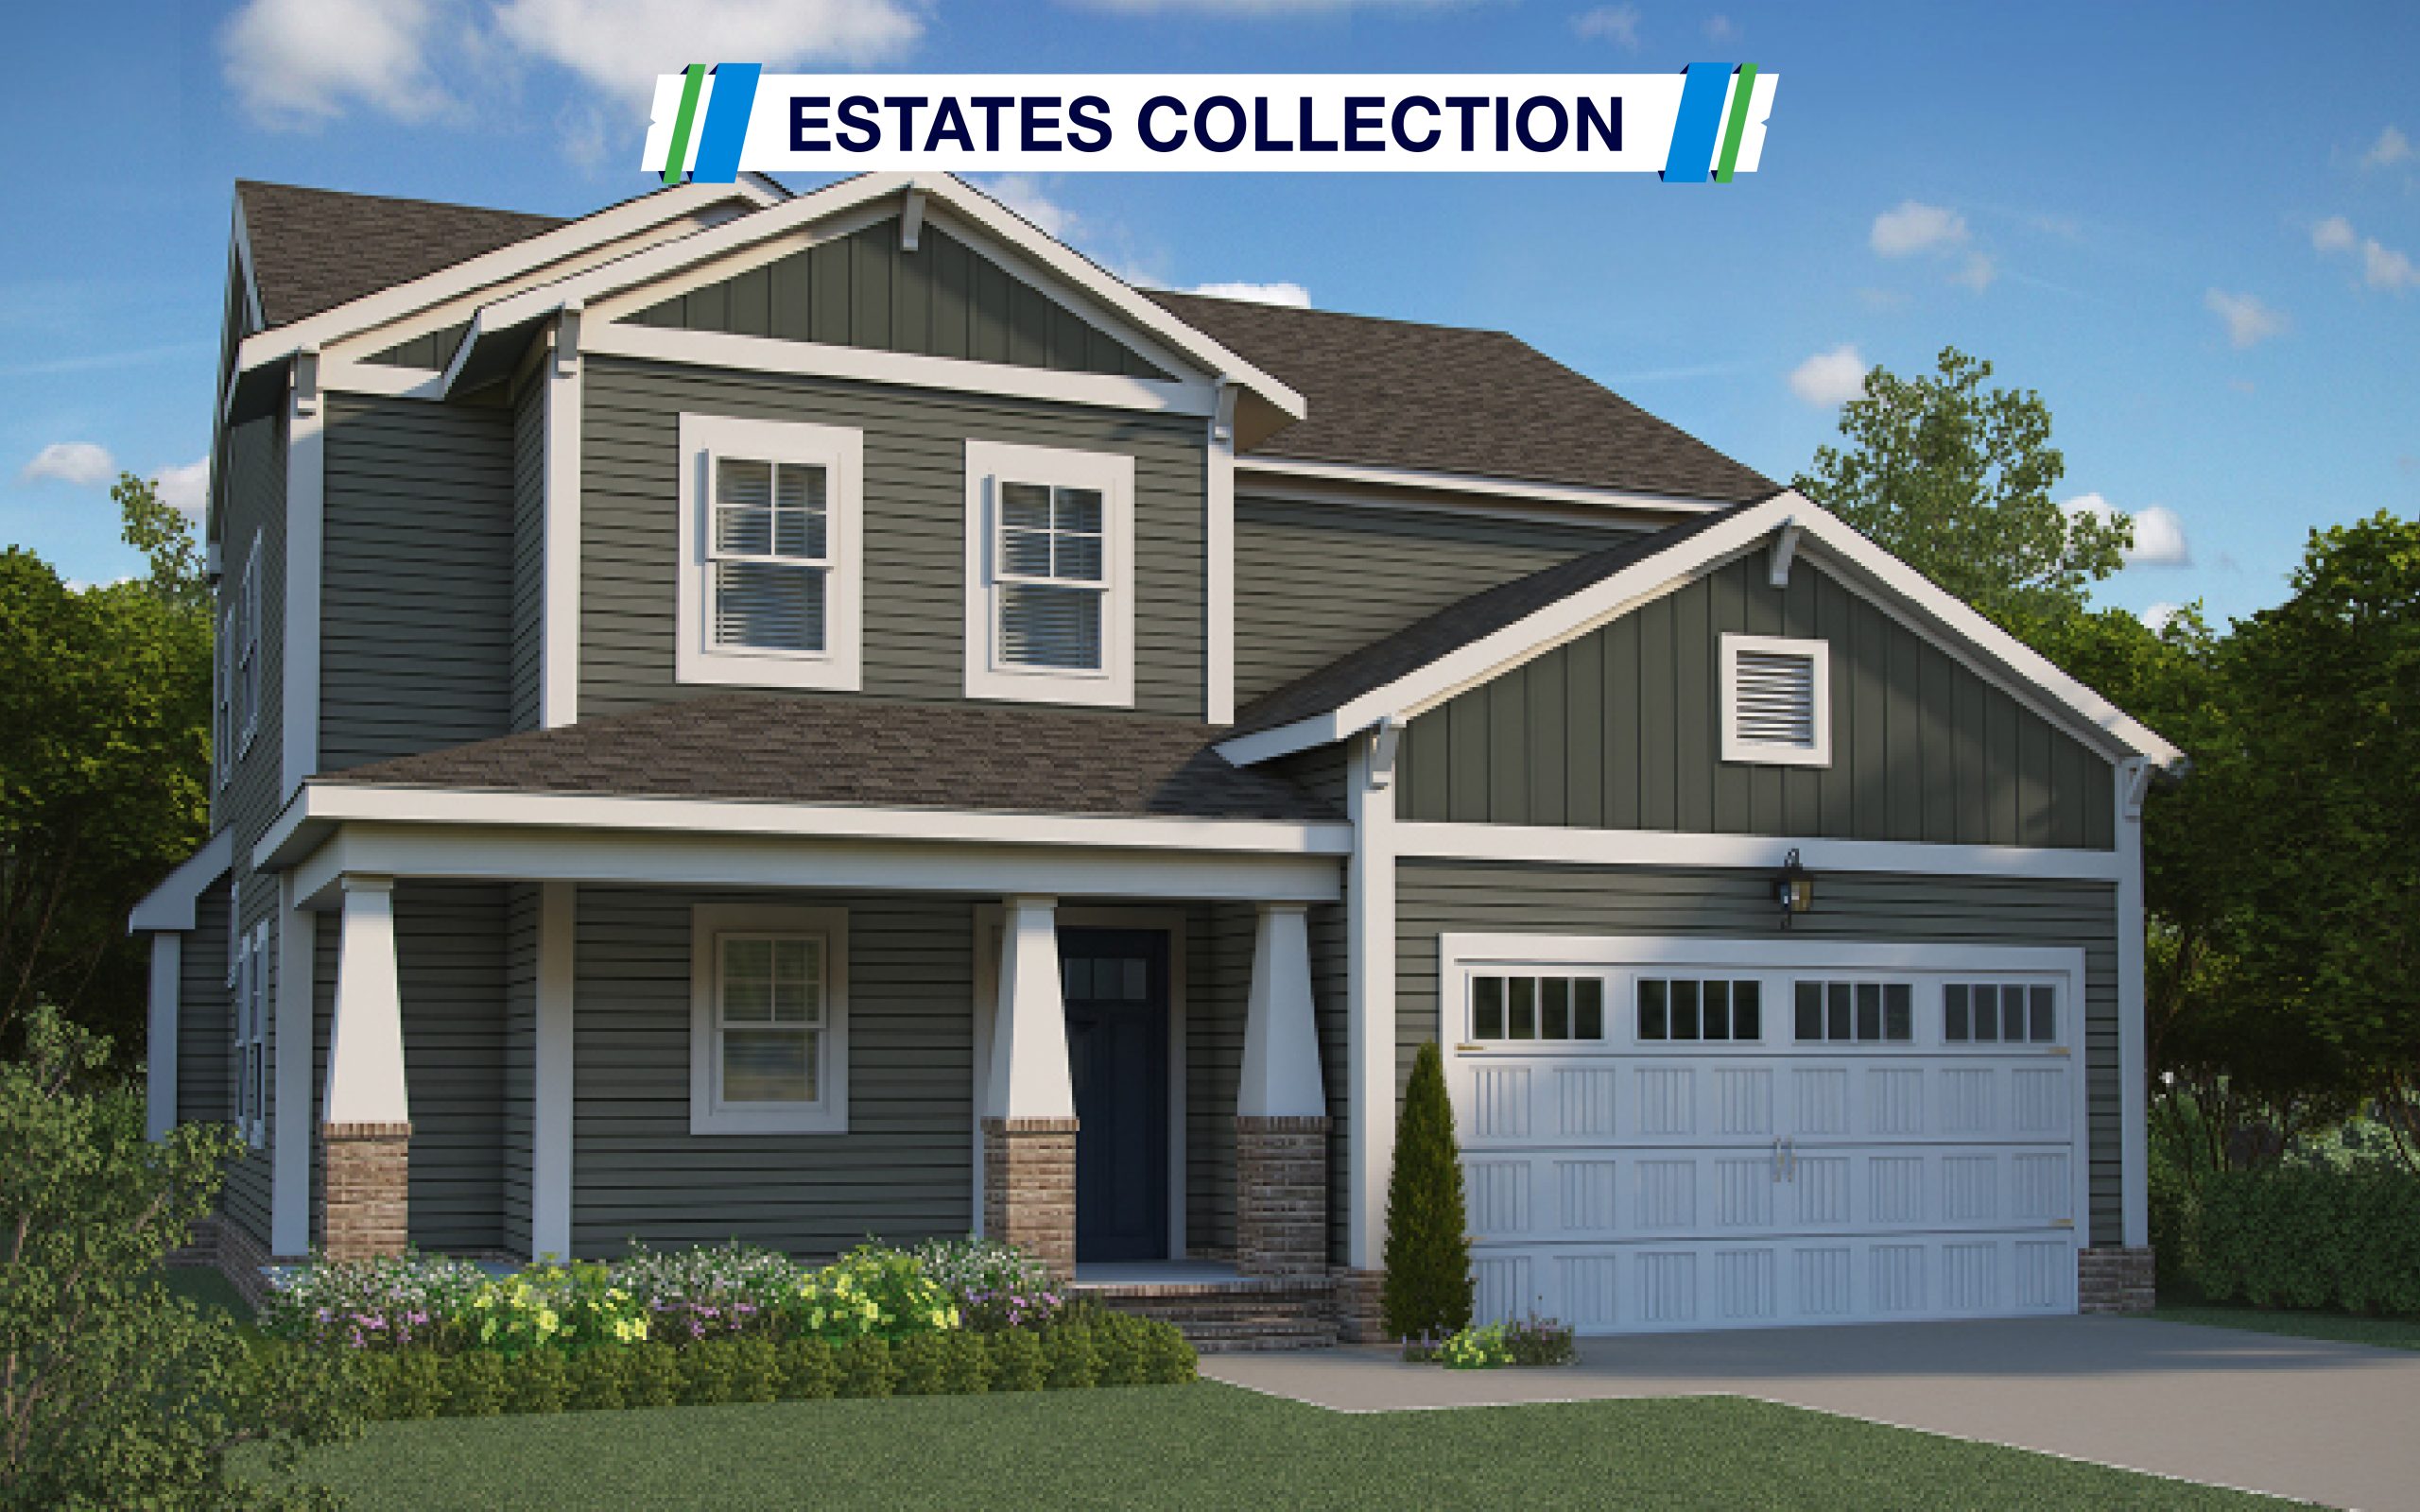 Image of the Palermo Model - The Estates Collection two story home. Exterior is dark green, two car garage, three windows in the front.